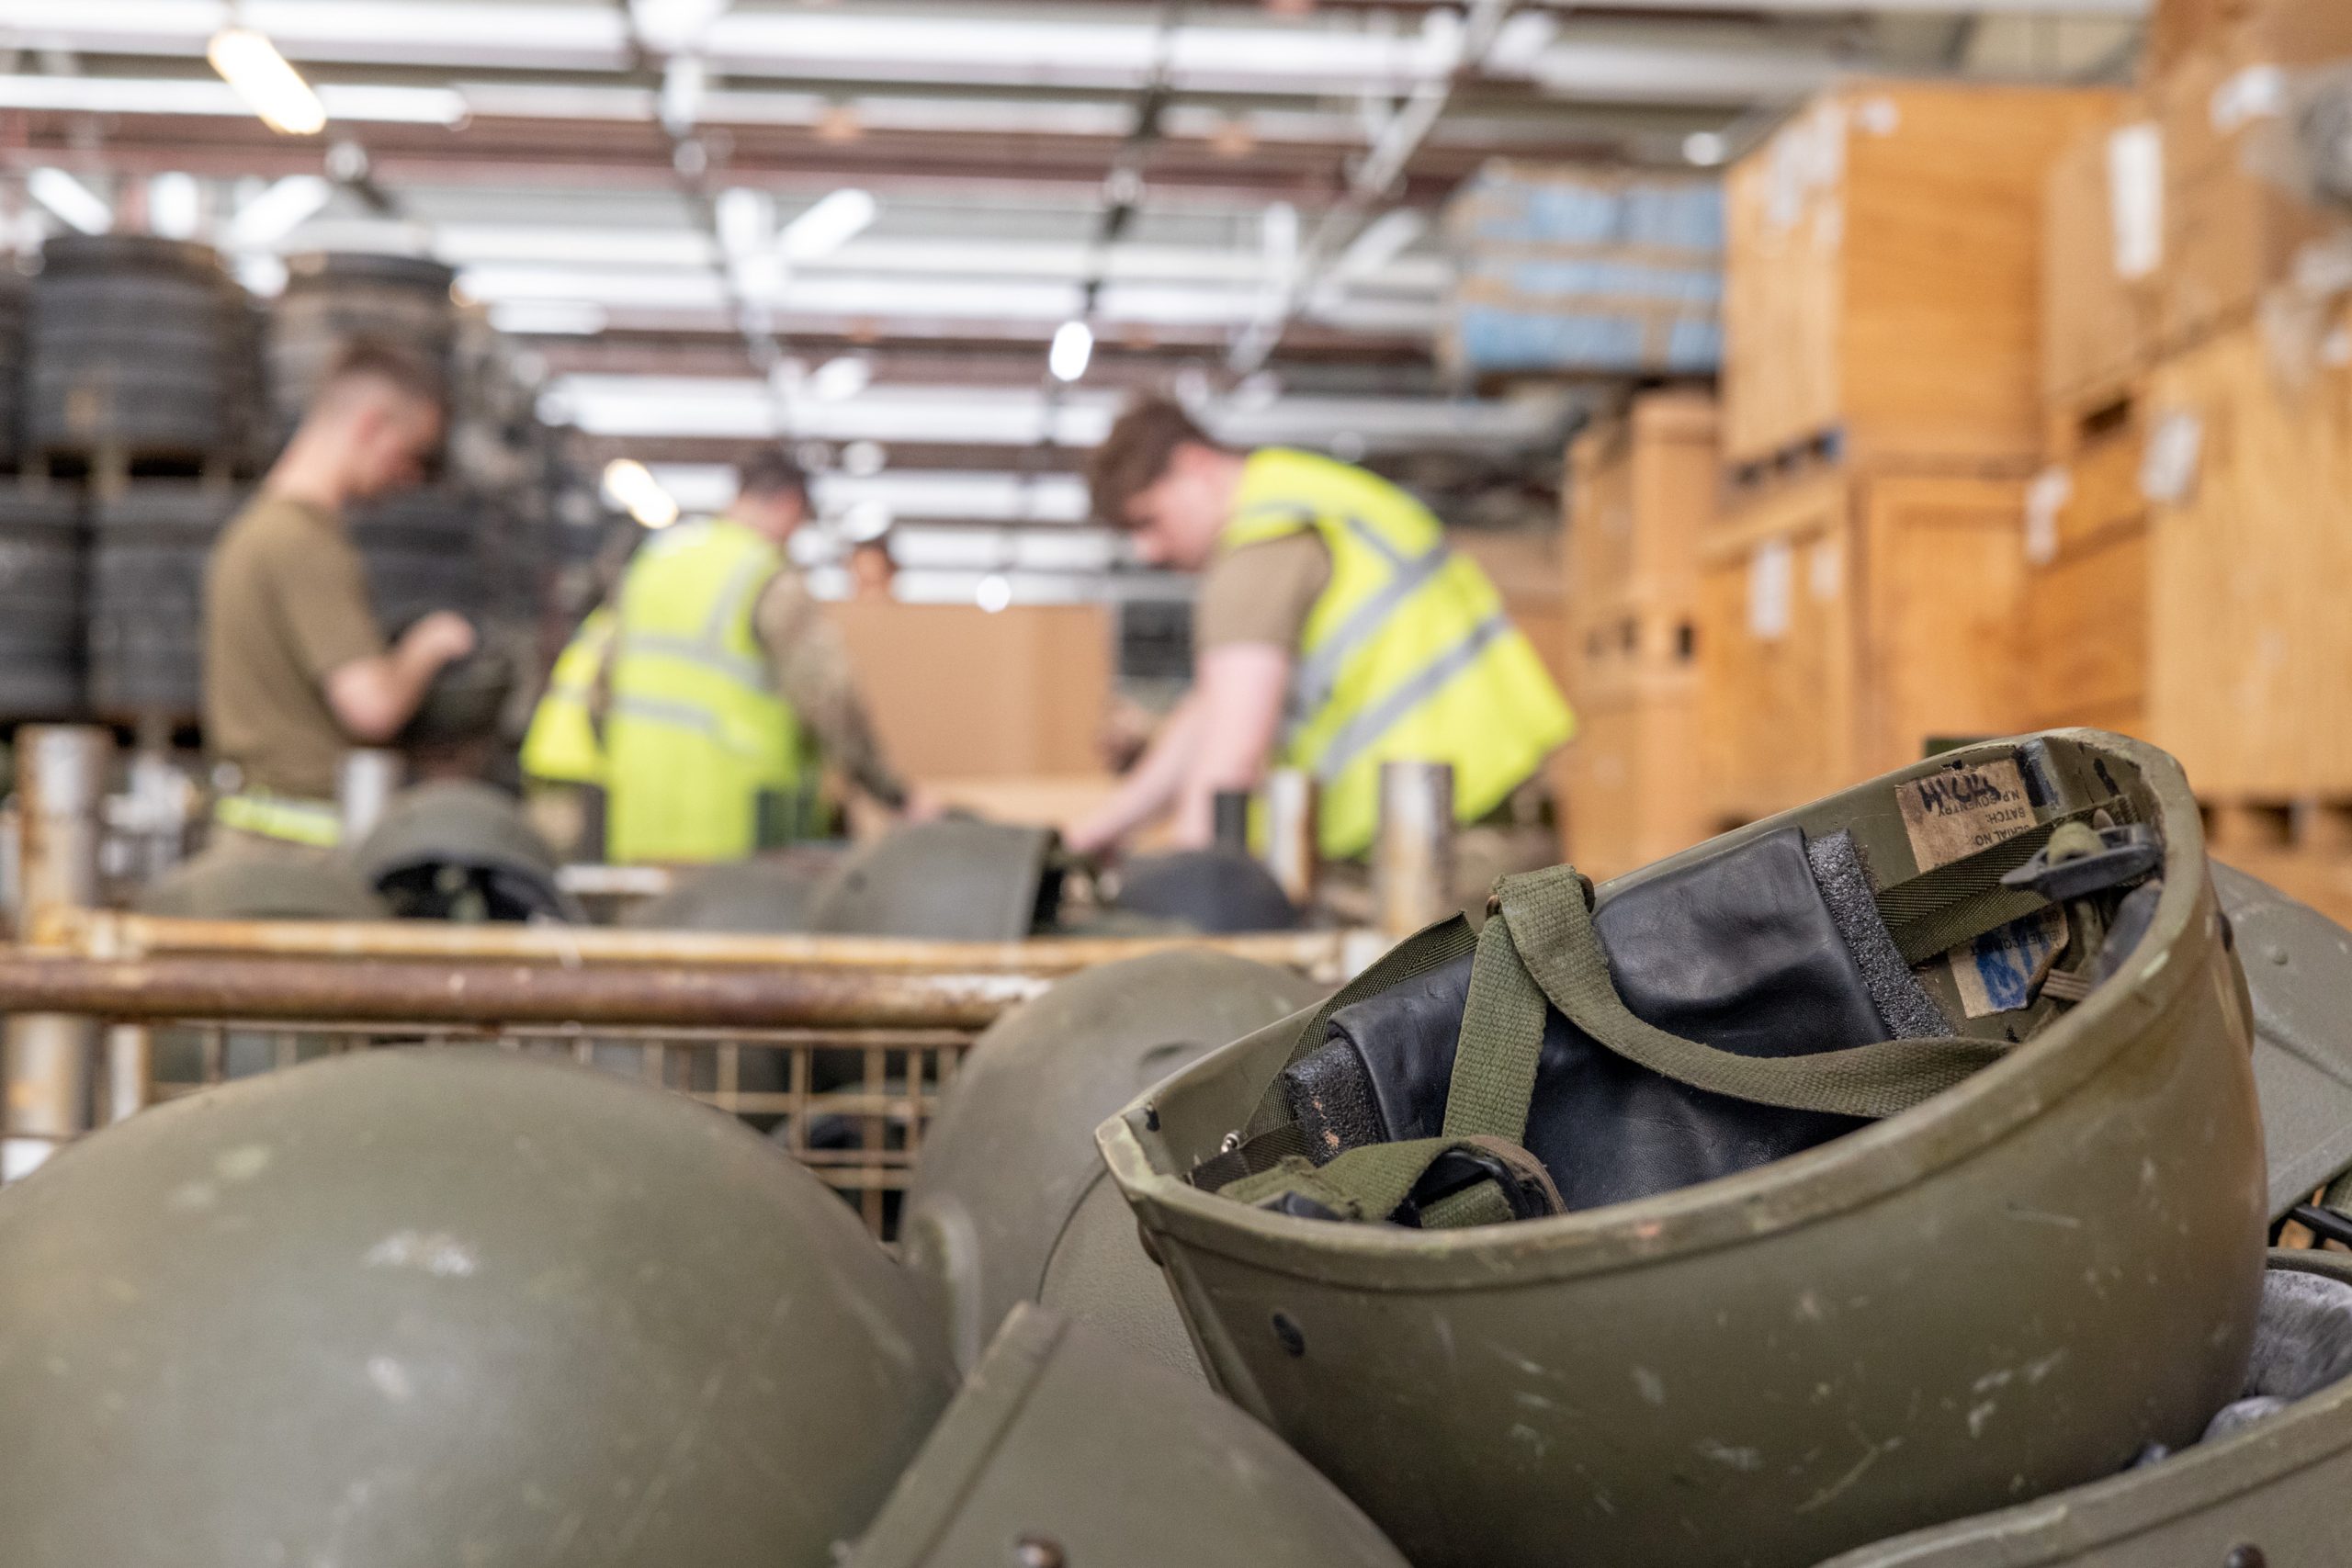 Hats Off To Ukraine – As Army Donates Thousands Of Helmets To Ukraine Military